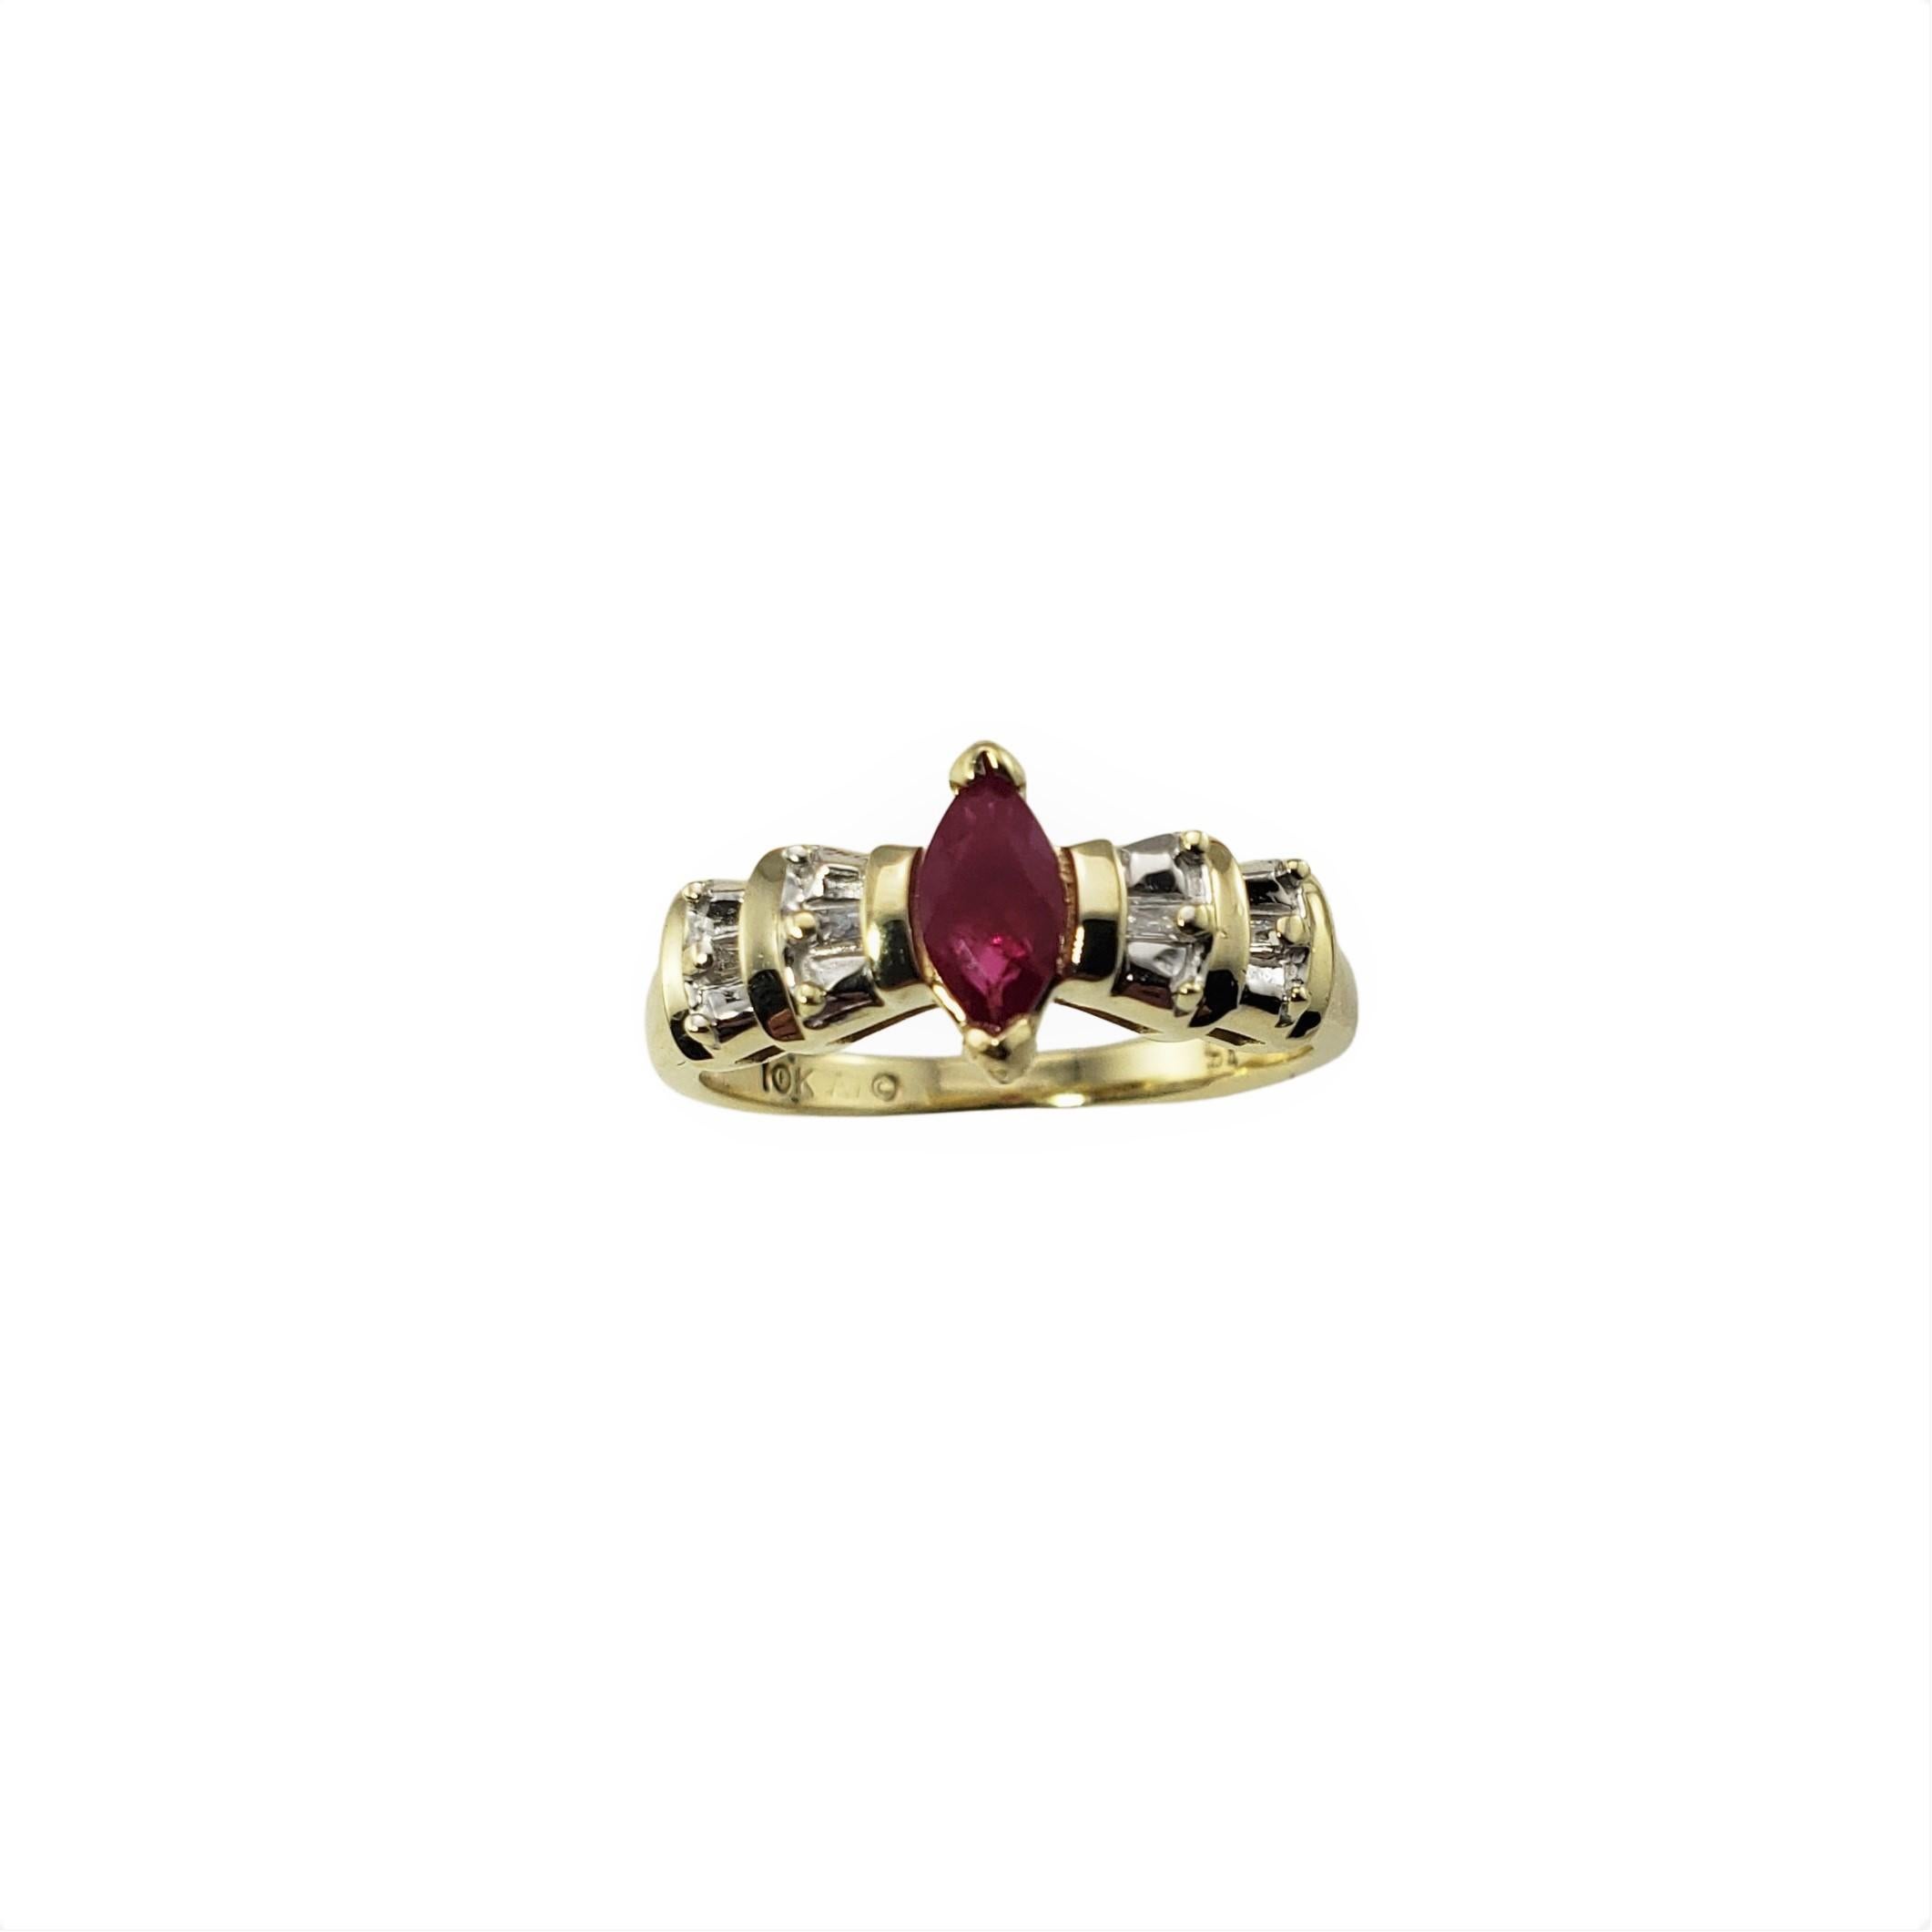 10 Karat Yellow Gold Ruby and Diamond Ring Size 6-

This lovely ring features one marquis ruby (7 mm x 4 mm) and four baguette diamonds set in classic 10K yellow gold.
Shank: 2 mm.

Approximate total diamond weight: .04 ct.

Diamond color: